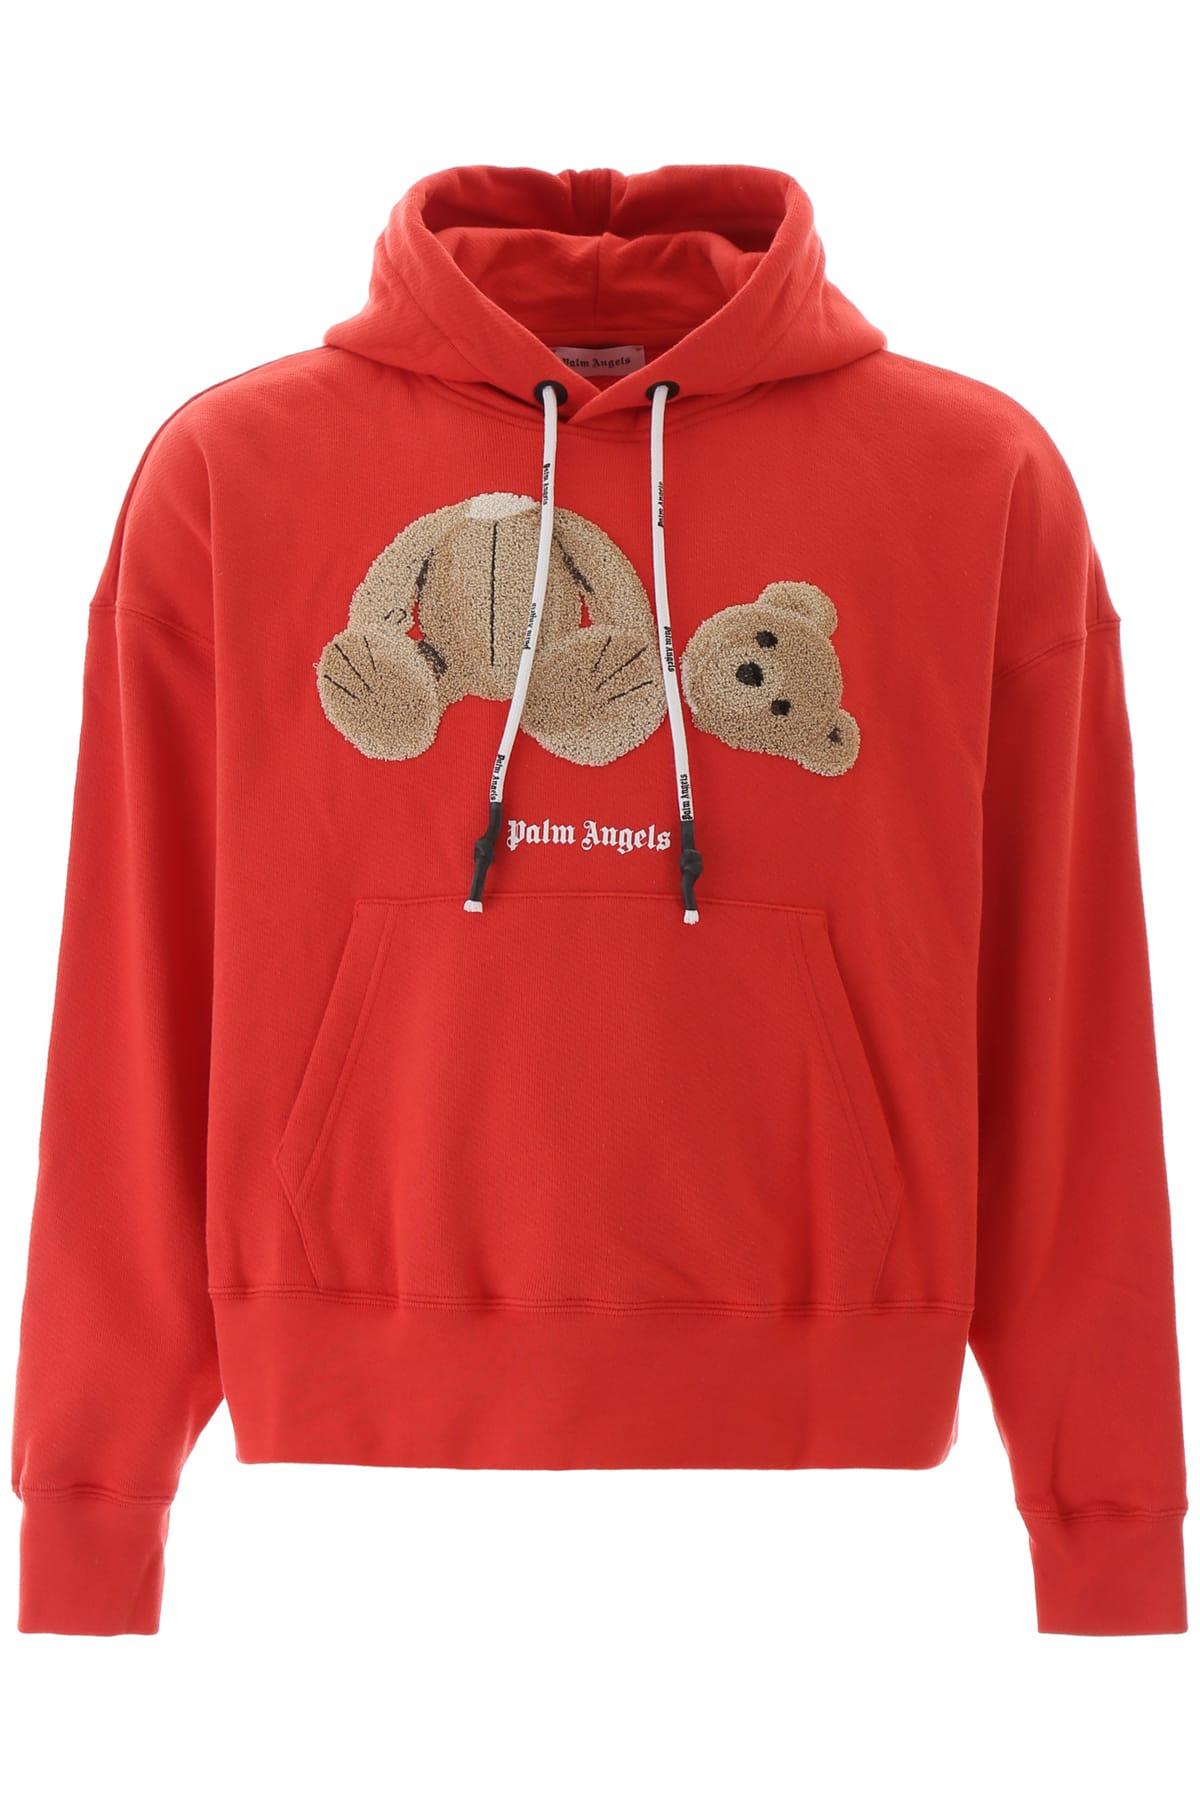 Palm Angels Cotton Jersey Hoodie W/ Bear Patch in Red/Brown (Red) for ...